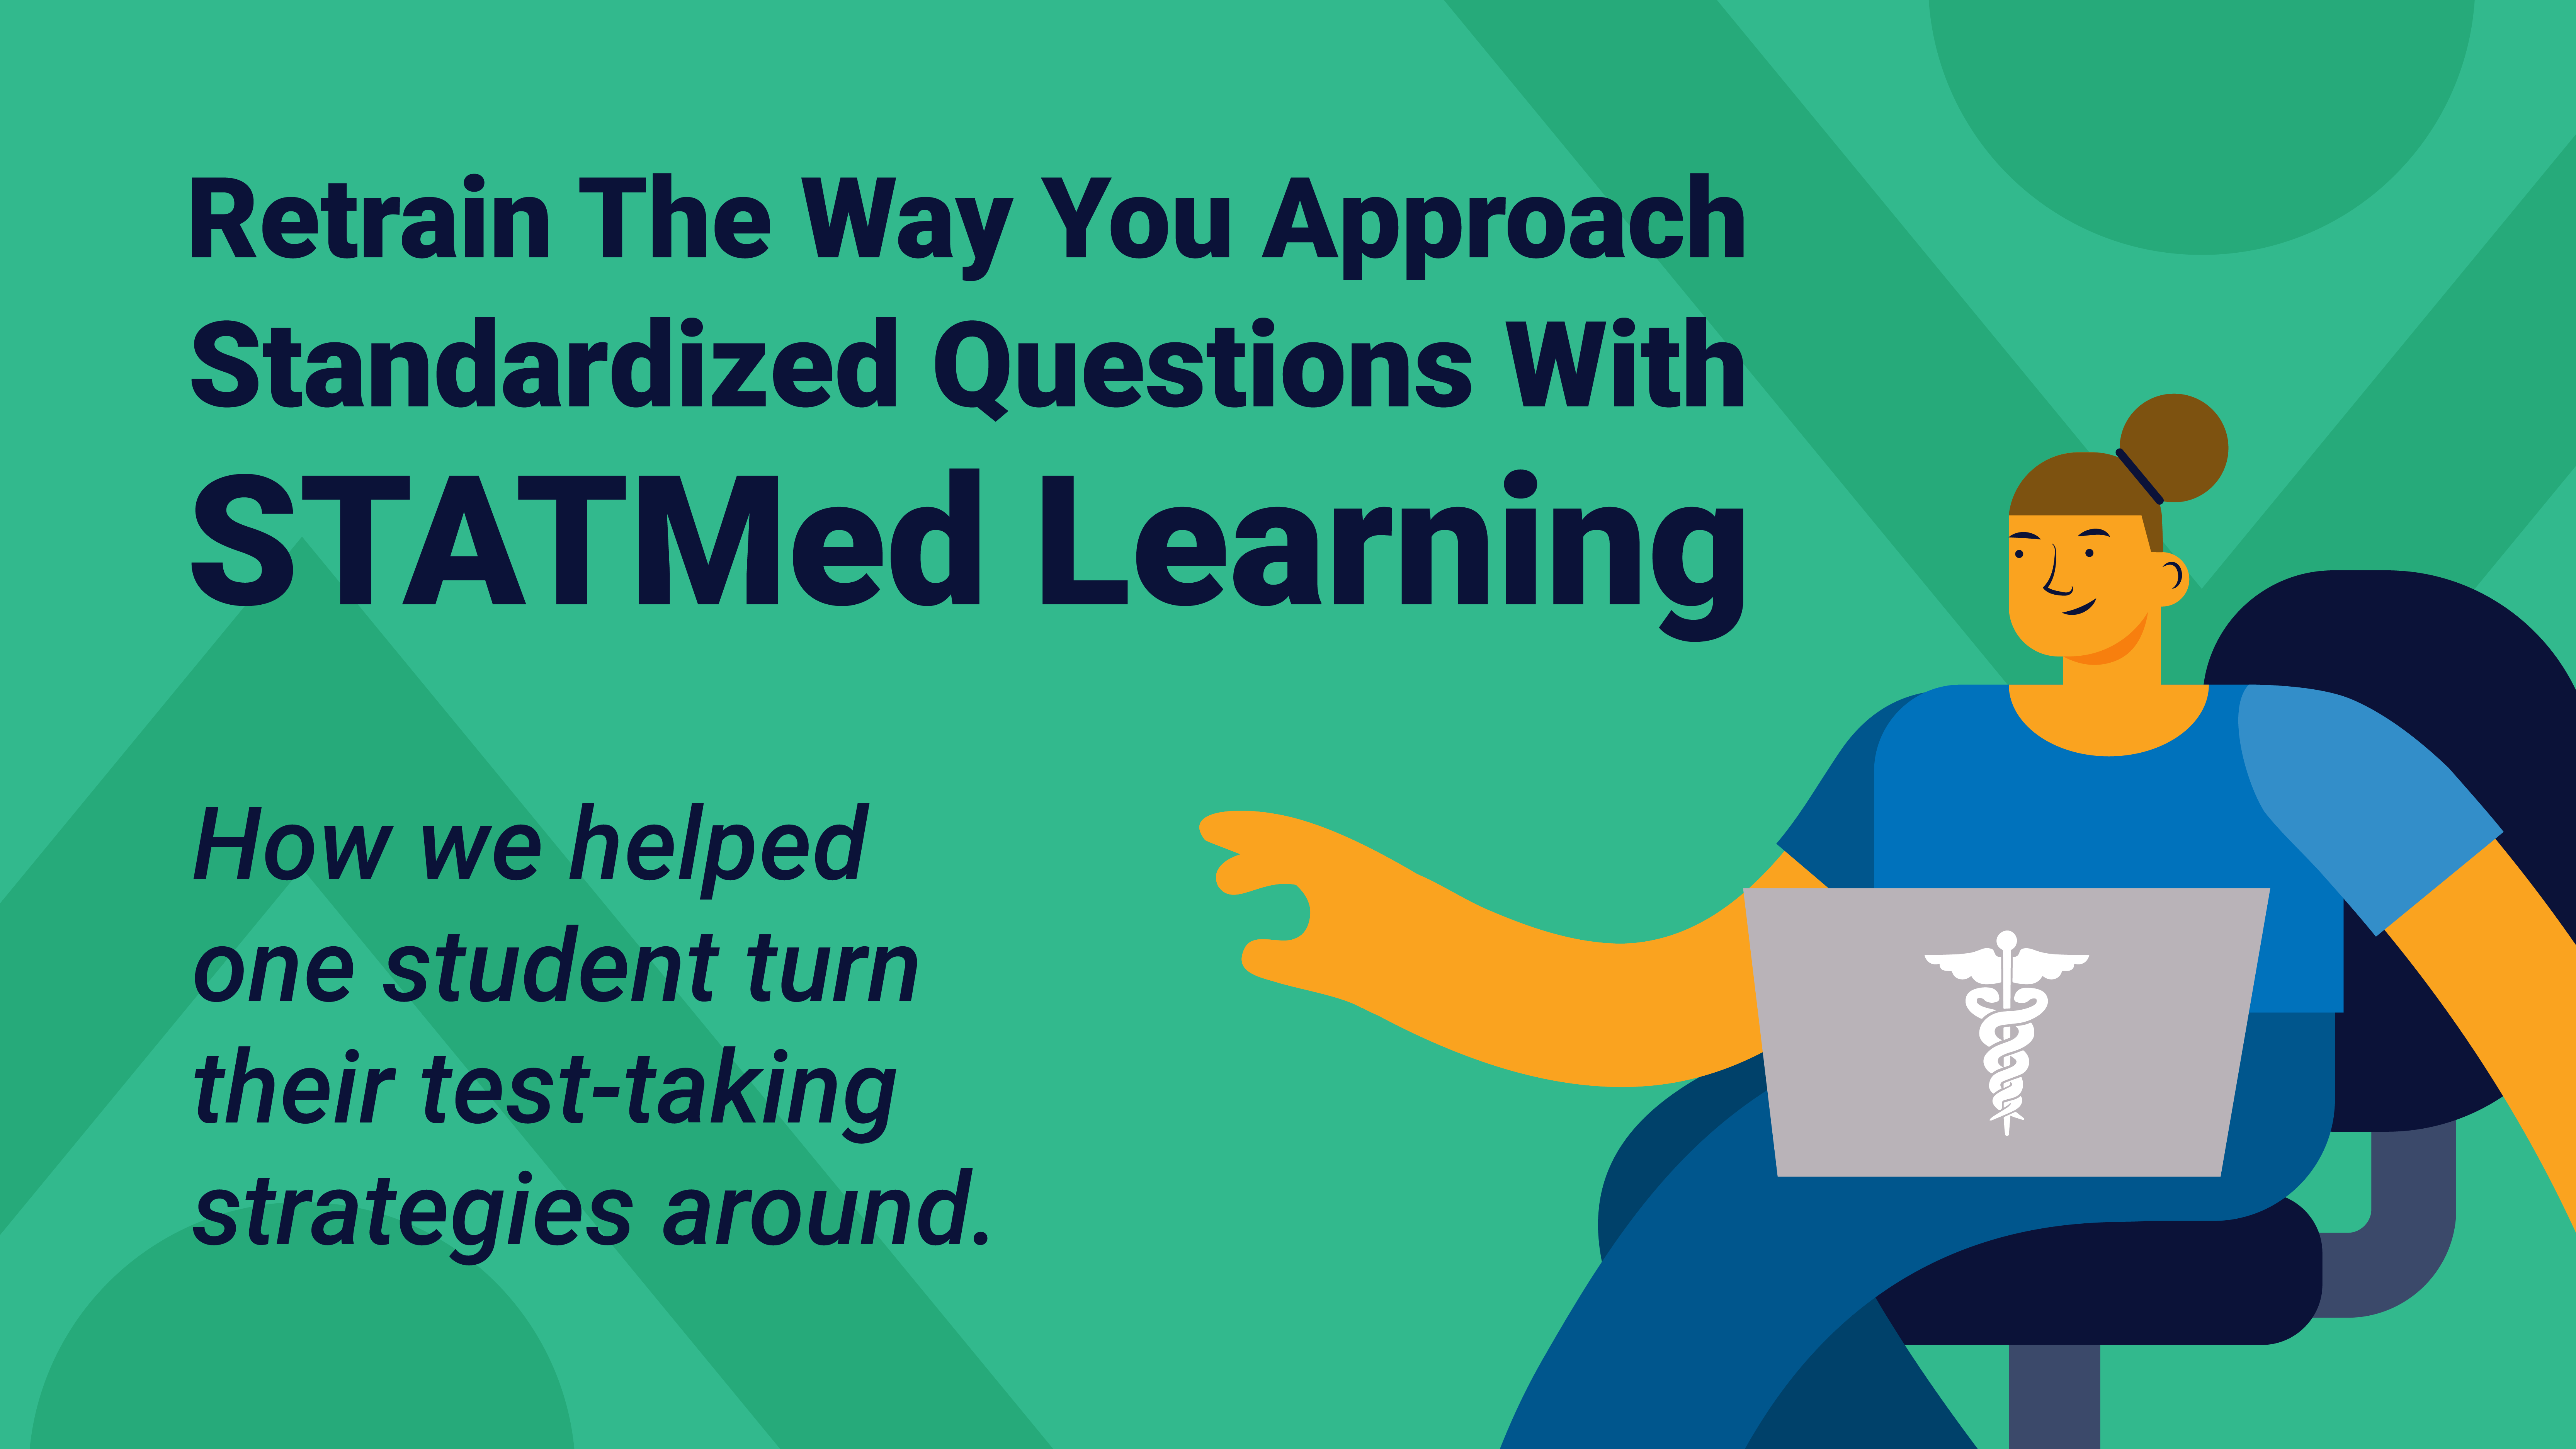 Featured image for “Retrain The Way You Approach Standardized Questions With STATMed Learning”